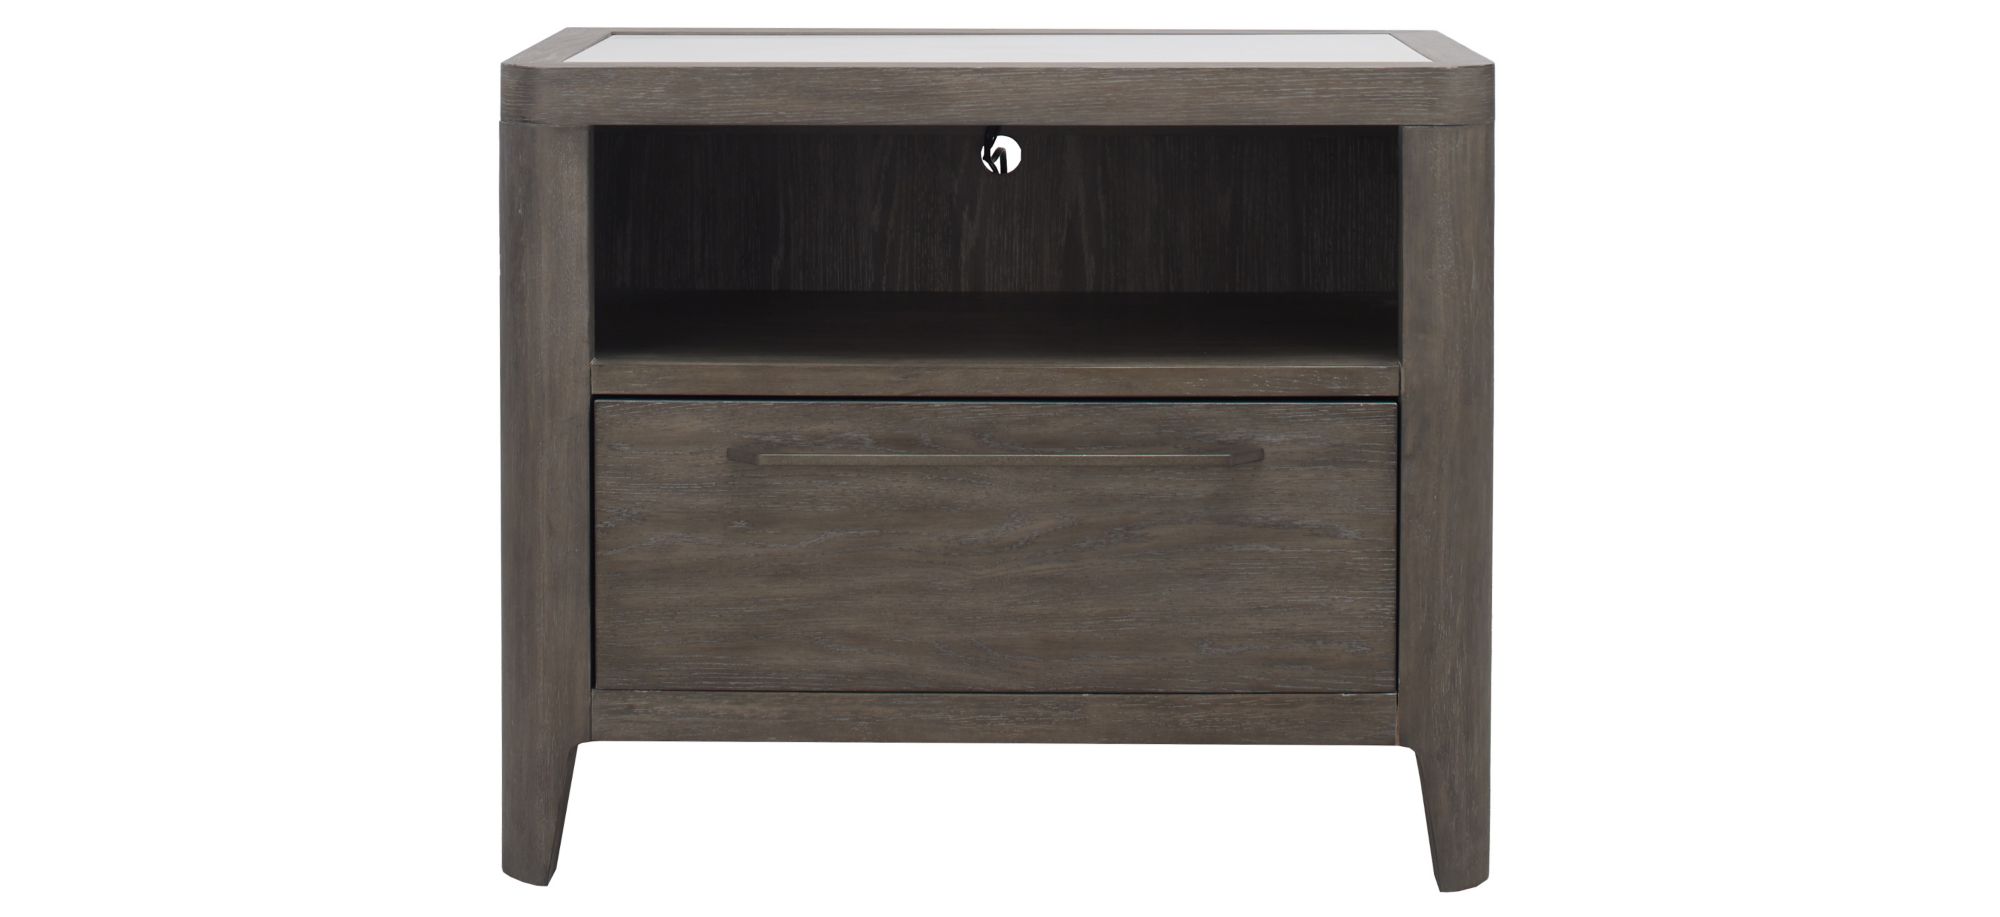 Castleton Nightstand in Smoked Oyster by Bellanest.